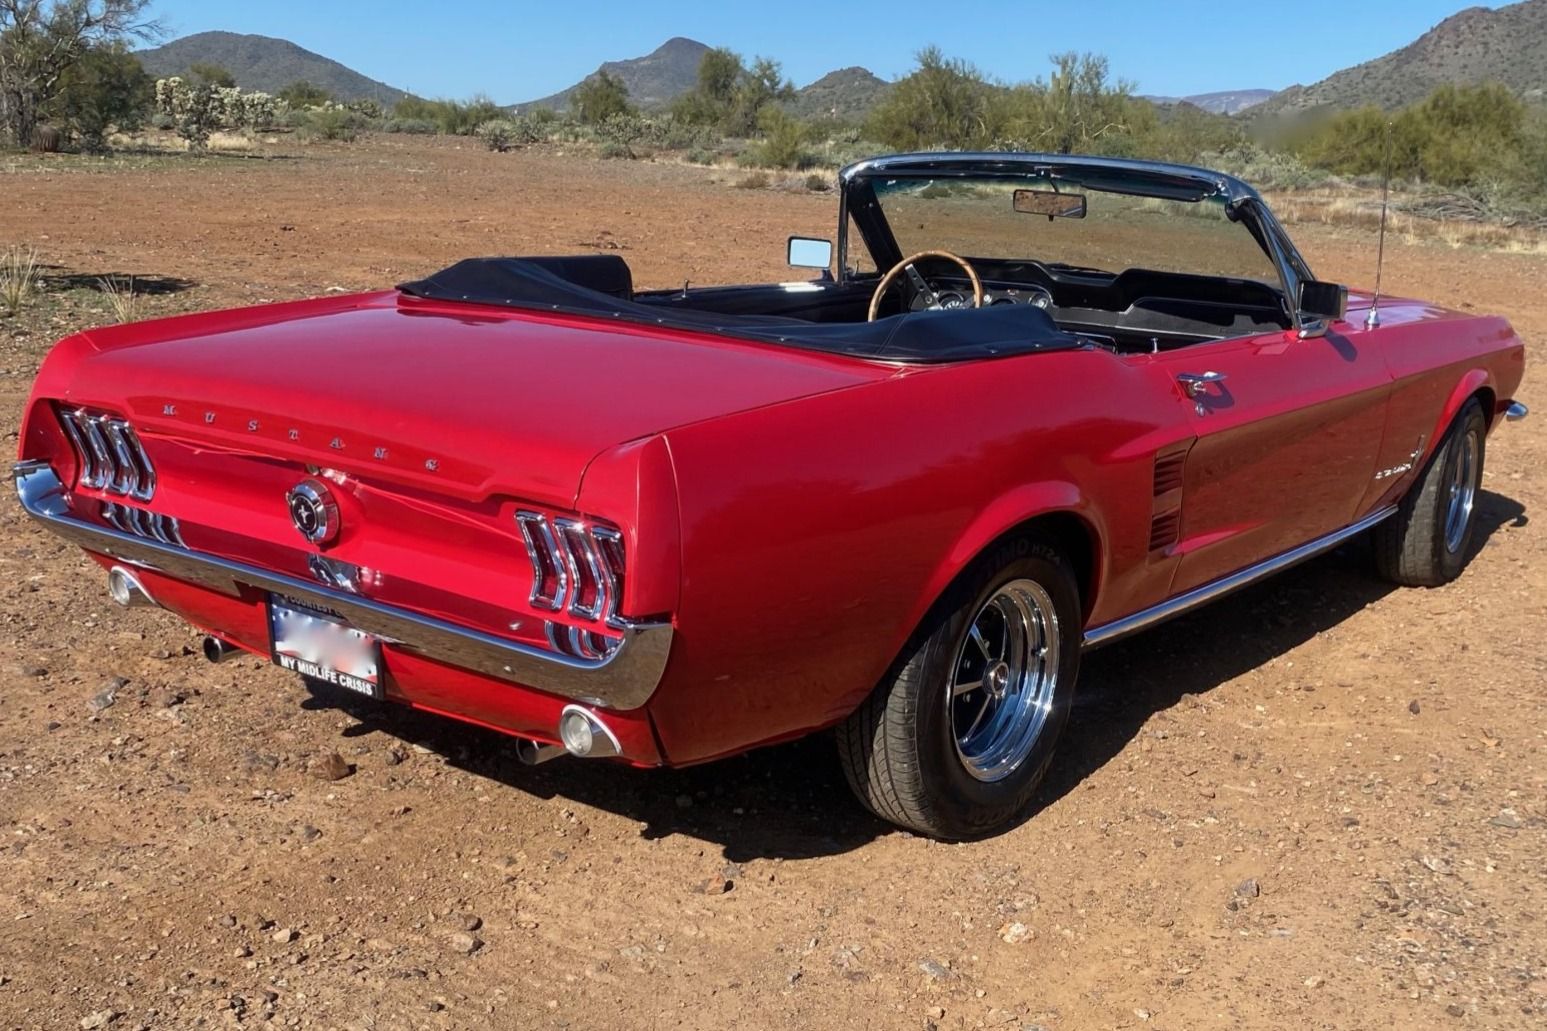 Red 1965-1973 Ford Mustang (First Generation) convertible